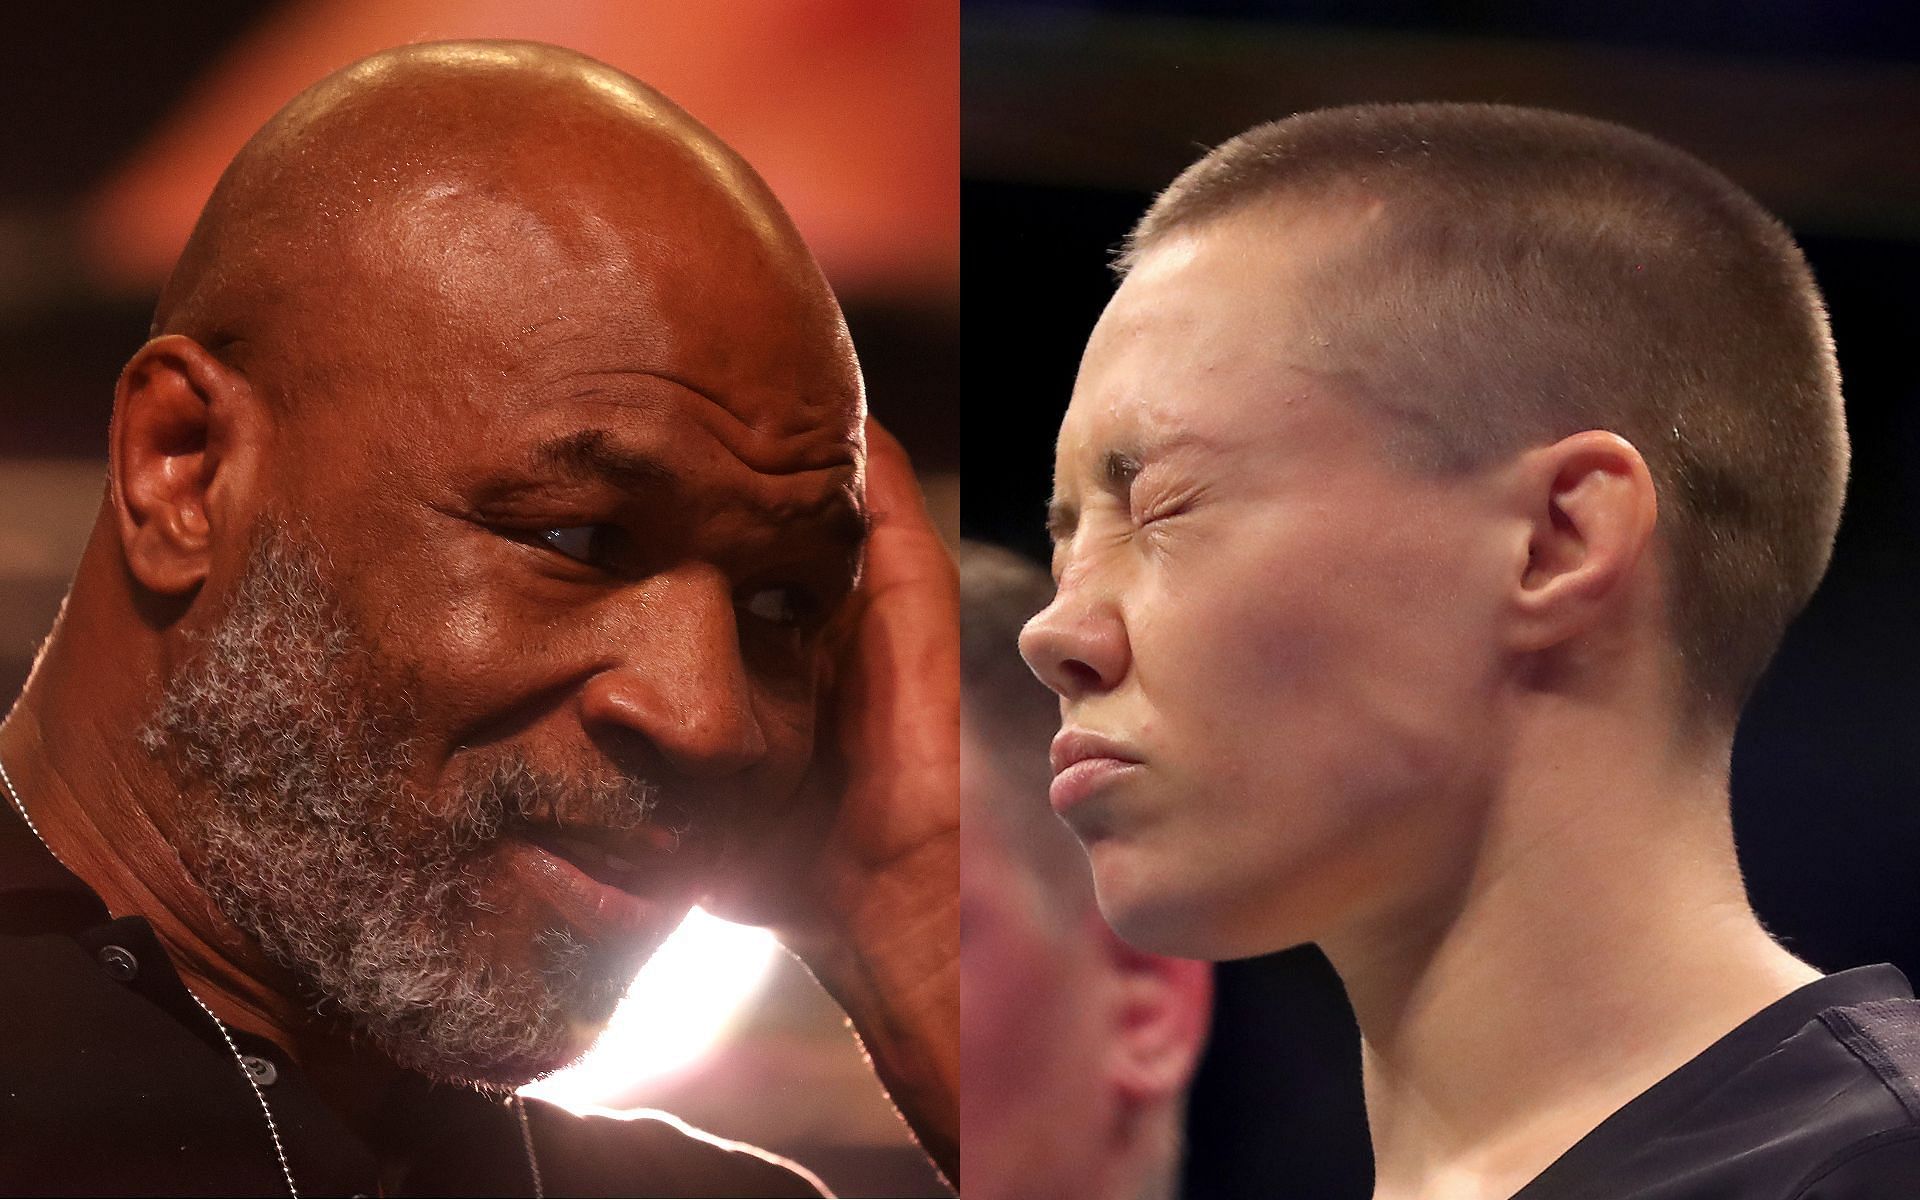 Mike Tyson (left) and Rose Namajunas (right) (Images via Getty)